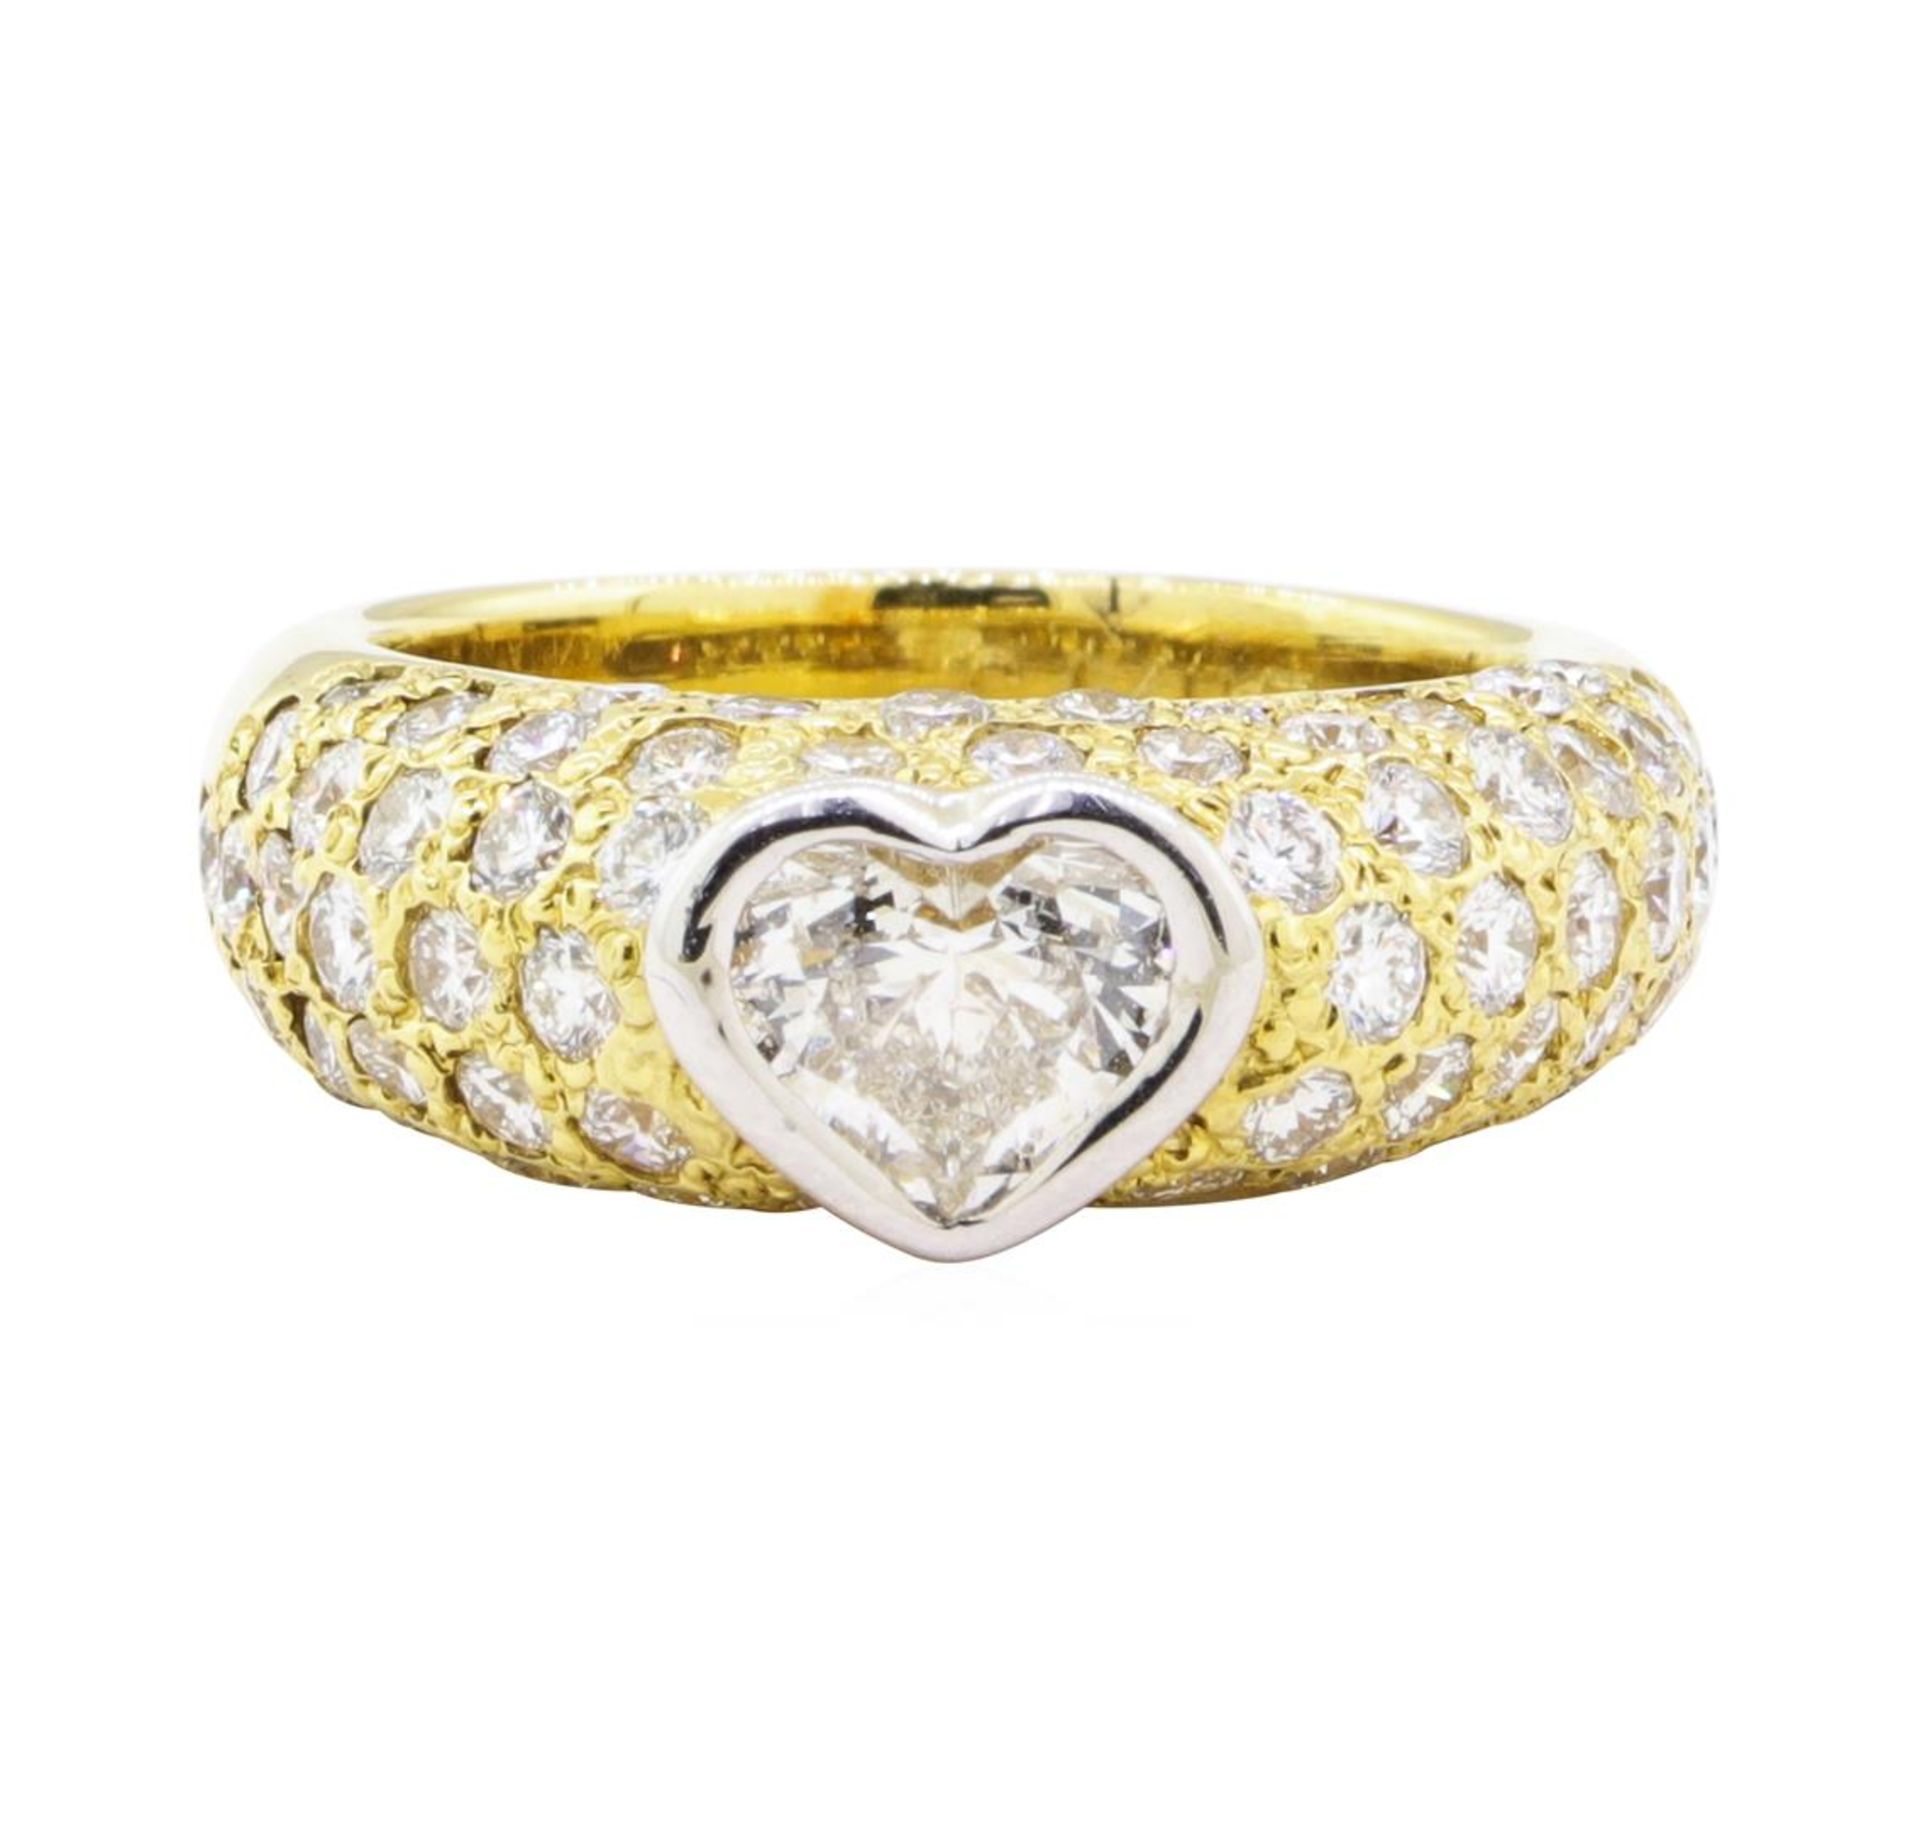 2.10 ctw Diamond Ring - Platinum and 18KT Yellow Gold - Image 2 of 5